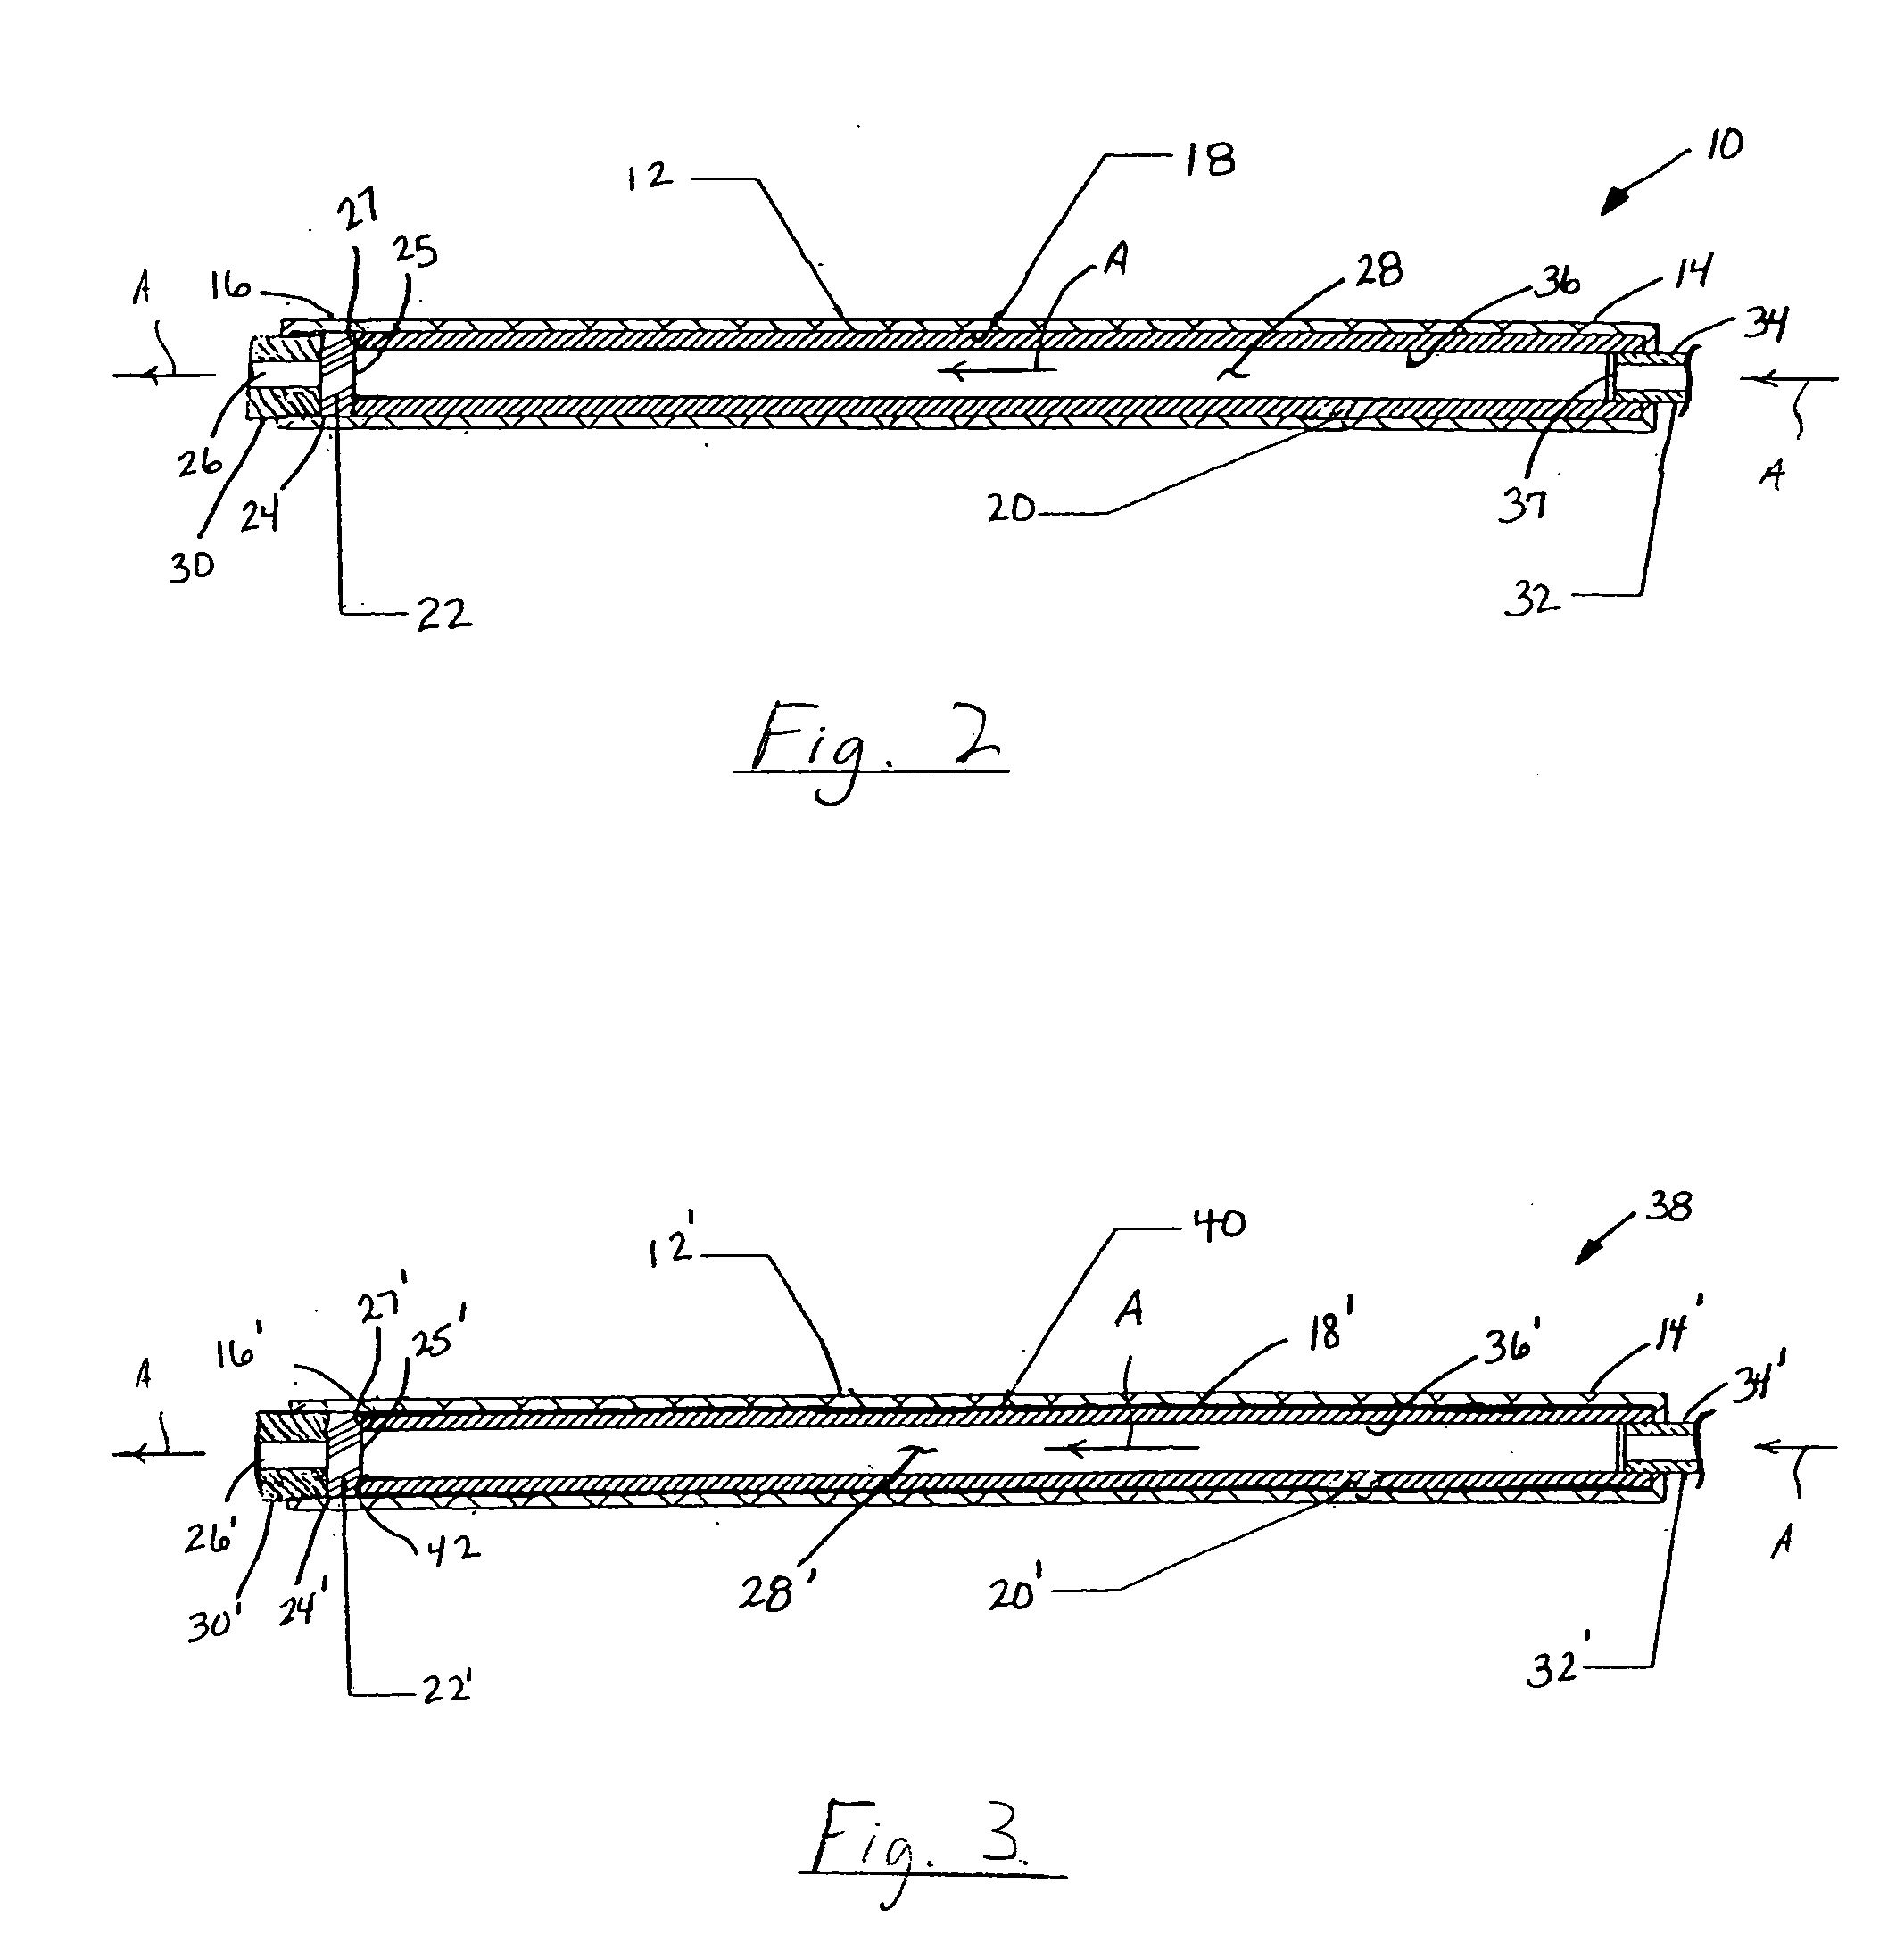 Liquid absorbing filter assembly and system using same